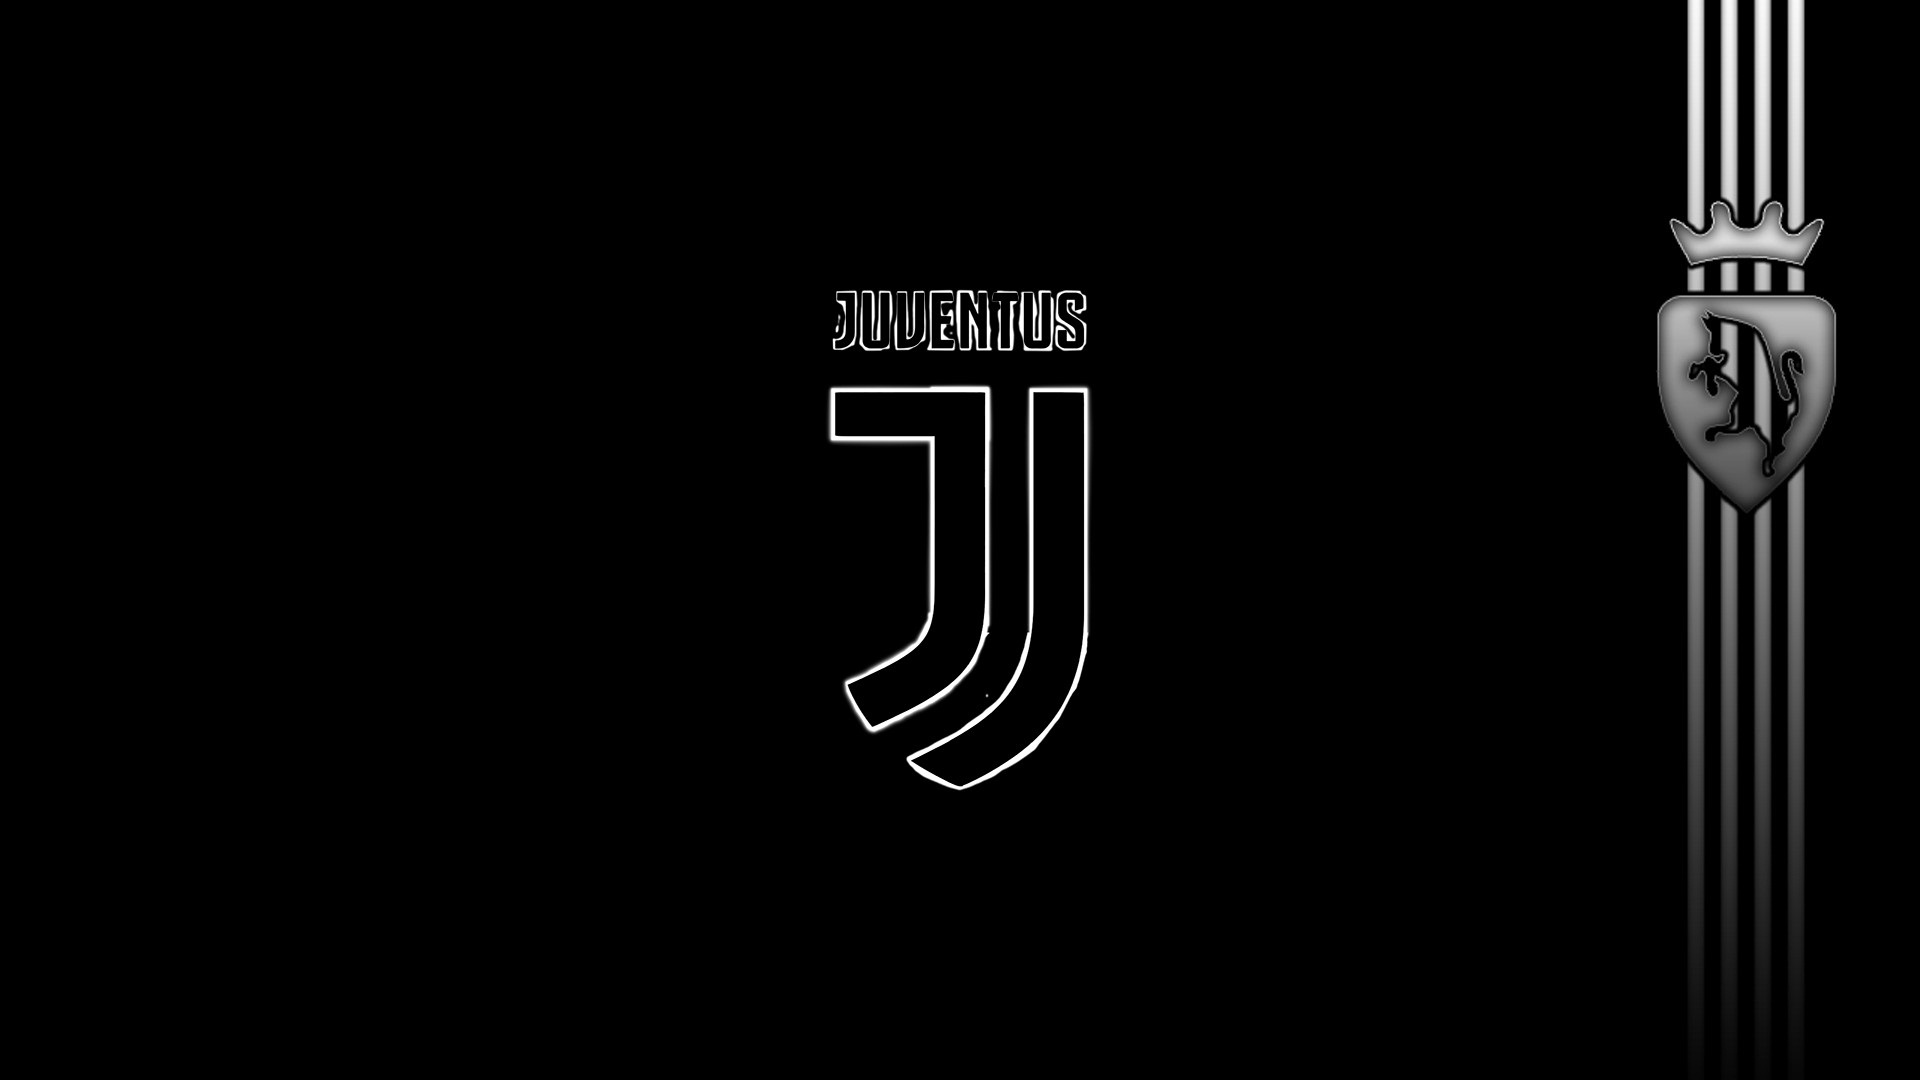 Wallpaper Desktop Juventus Logo HD With Resolution 1920X1080 pixel. You can make this wallpaper for your Mac or Windows Desktop Background, iPhone, Android or Tablet and another Smartphone device for free